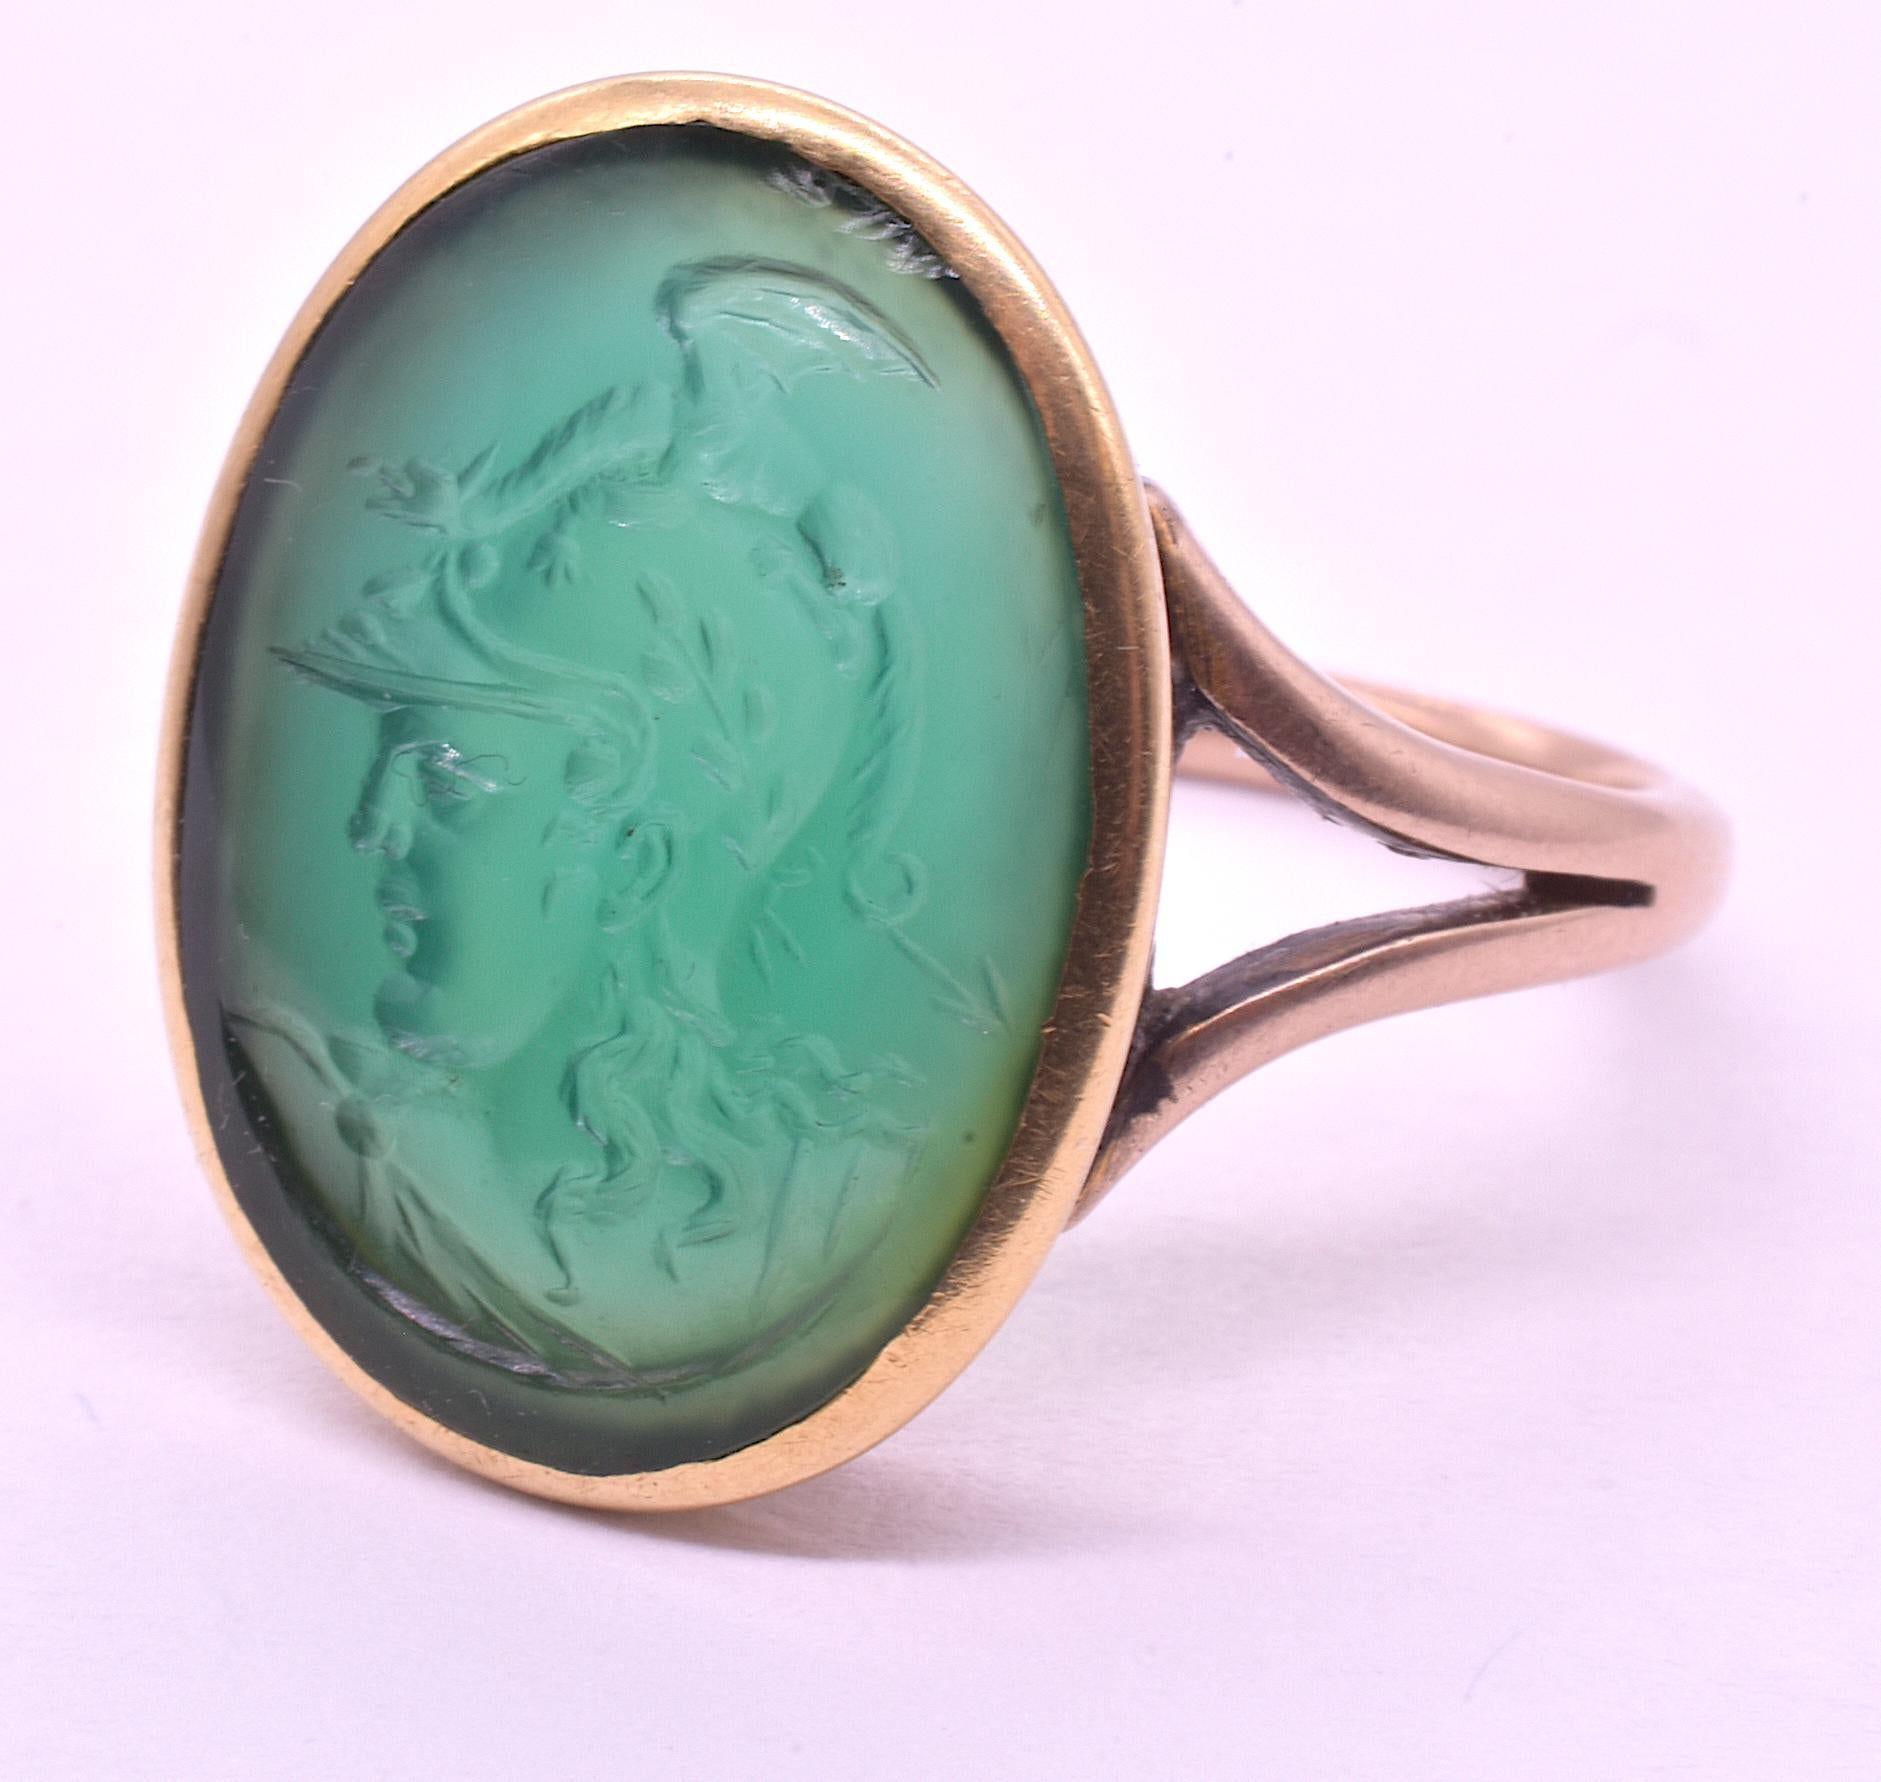 Women's or Men's C1860 Agate Signet Ring of Bust of Helmeted Warrior, Probably Menelaus